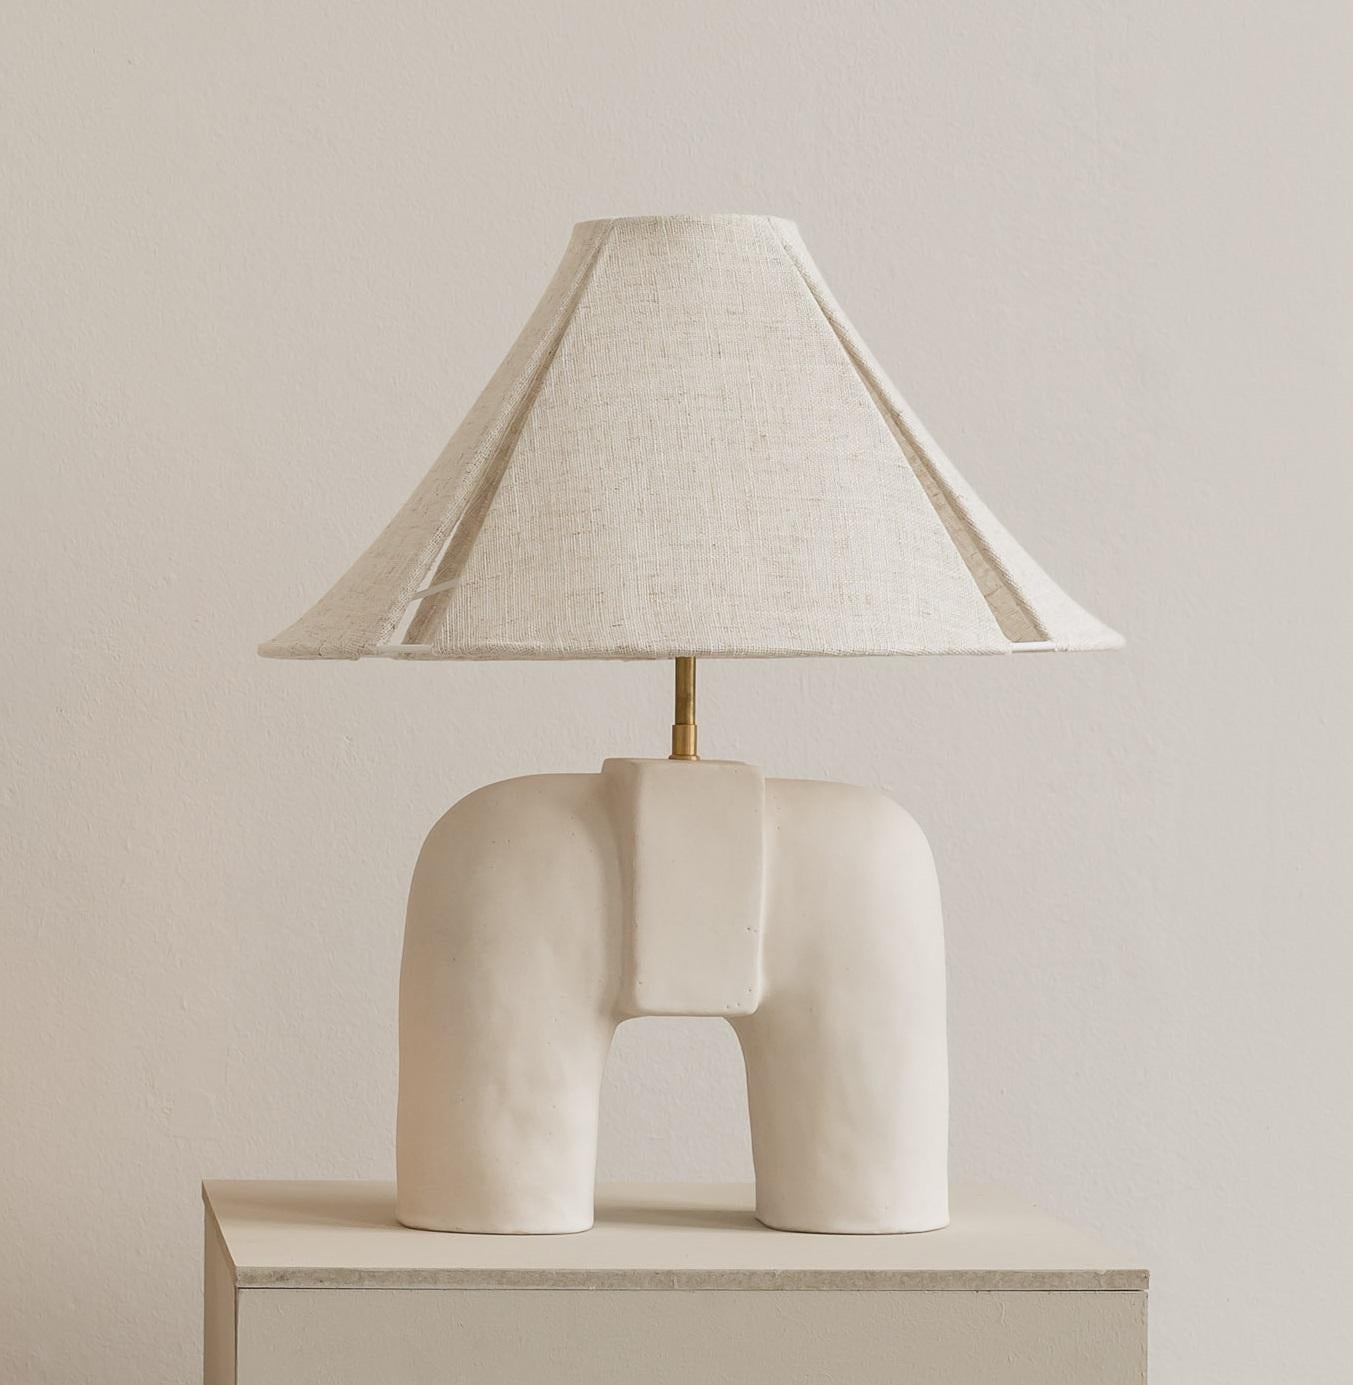 Audrey Table Lamp by Cuit Studio
One of a Kind.
Dimensions: Ø 40 x H 50 cm.
Materials: Stoneware white crackled matt with linnen lampshade.

Due to the handmade process of this item, each piece will be unique and some variation is to be expected.